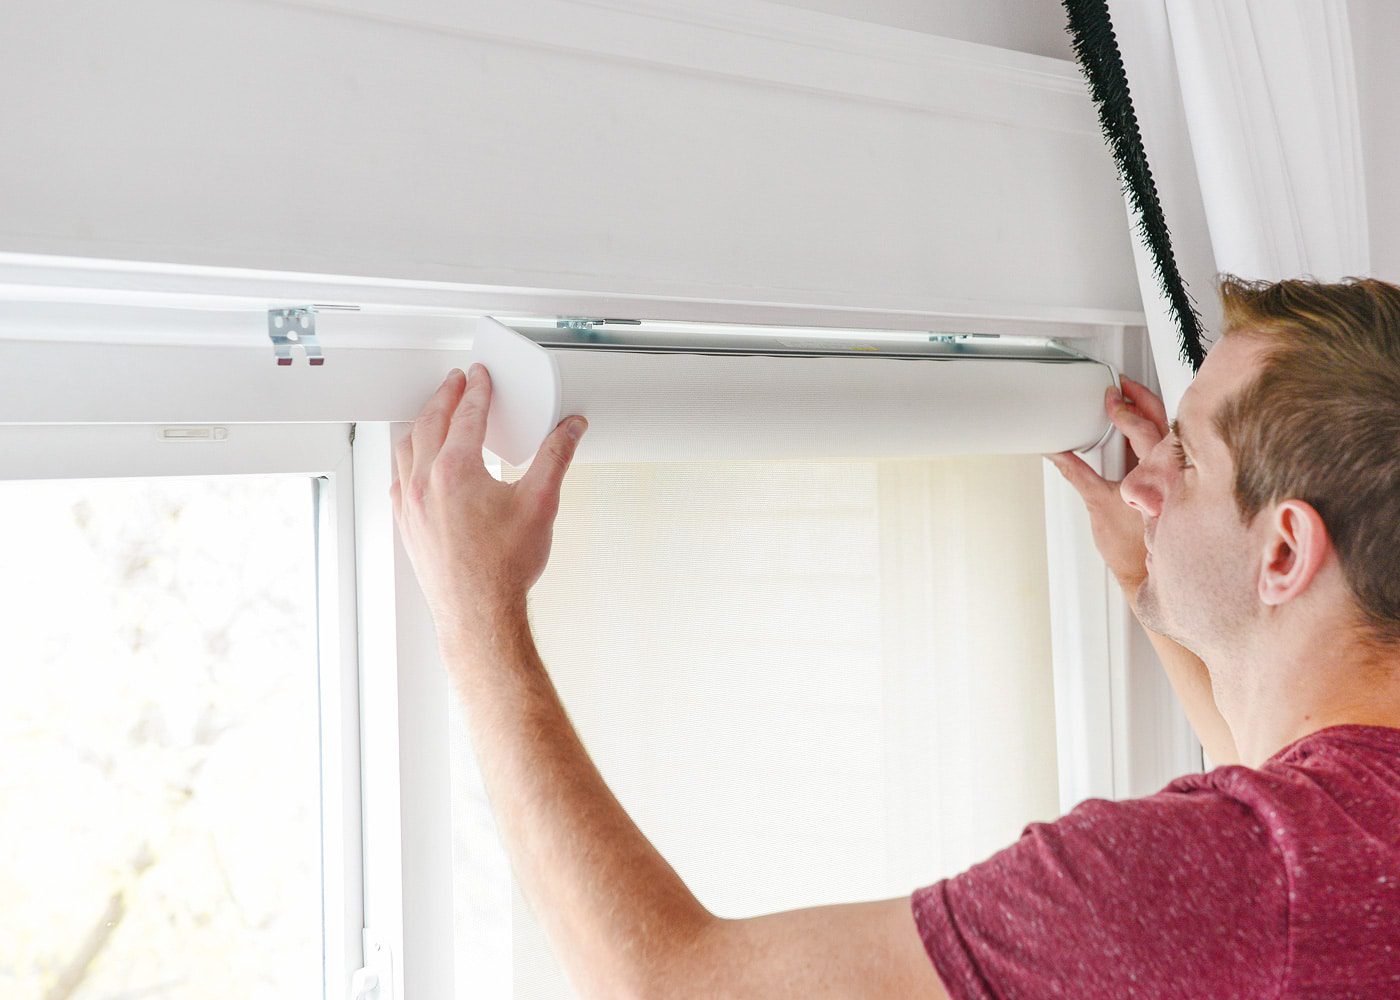 How To Install Bali Blinds With An Inside Mount